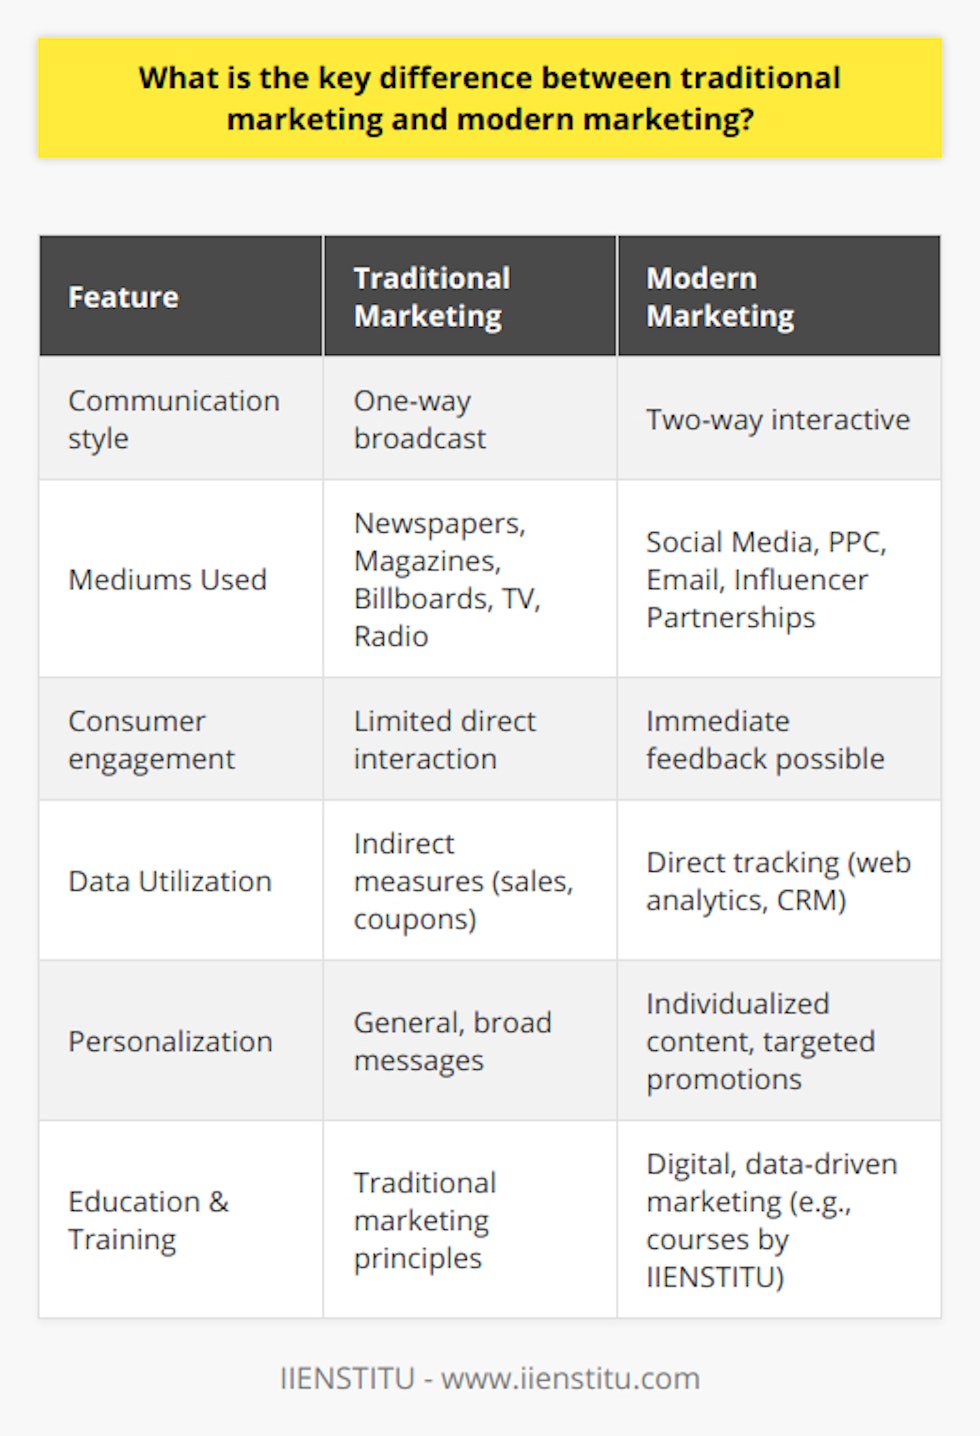 The key difference between traditional marketing and modern marketing can be explored through a central axis of transformation: the evolution from a broadcast to an interactive paradigm. Traditional marketing is characterized by its one-way street approach where companies broadcast their messages through channels such as newspapers, magazines, billboards, television, and radio. These mediums do not provide the opportunity for direct interaction or dialogue with the consumers, and the messages are often intended to reach a broad audience with a general, non-personalized approach.In contrast, modern marketing heavily emphasizes interactivity, enabled by the rise of the digital age. The proliferation of internet usage and the ubiquity of social media platforms have catalyzed a seismic shift towards two-way conversations. This is evident in strategies such as social media engagement, pay-per-click advertising, email marketing, and influencer partnerships, where the consumer can interact with the brand’s messaging and often provide immediate feedback.A pivotal aspect of modern marketing is the collection and utilization of data to inform strategies and campaigns. Unlike traditional marketing—where success and customer insight were estimated through indirect measures like sales uplift or coupon redemption rates—modern digital tools allow for real-time tracking and analysis. Companies can now understand their consumers' behaviors and preferences at an unprecedented granular level through web analytics, cookie tracking, and customer relationship management (CRM) systems. This data-centric approach paves the way for sophisticated techniques such as predictive analytics and programmatic advertising.Personalization is another cornerstone of modern marketing that directly contrasts with the one-size-fits-all mentality of traditional practices. Today, businesses strive to tailor content to individual users, offering products and promotions based on past purchases, browsing behavior, and predictive modeling. The ability to personalize at scale is made possible by sophisticated algorithms and vast data processing capabilities, contributing to a more nuanced and effective engagement with each customer.In educational aspects, institutions like IIENSTITU, provide resources and courses that reflect these changes in marketing strategies. They address the needs of a new generation of marketers who are looking to thrive in a digital, data-driven environment and understand the nuances of engaging the modern consumer. To encapsulate, while traditional marketing encapsulated a wider net with a hope to catch some interested customers, modern marketing is more like a guided missile, targeting precise customer needs and establishing a responsive, ongoing dialogue. This not only elevates the consumer journey to one of personal relevance and satisfaction but also enhances the efficiency and effectiveness of marketing campaigns in driving business growth and fostering enduring customer relationships.